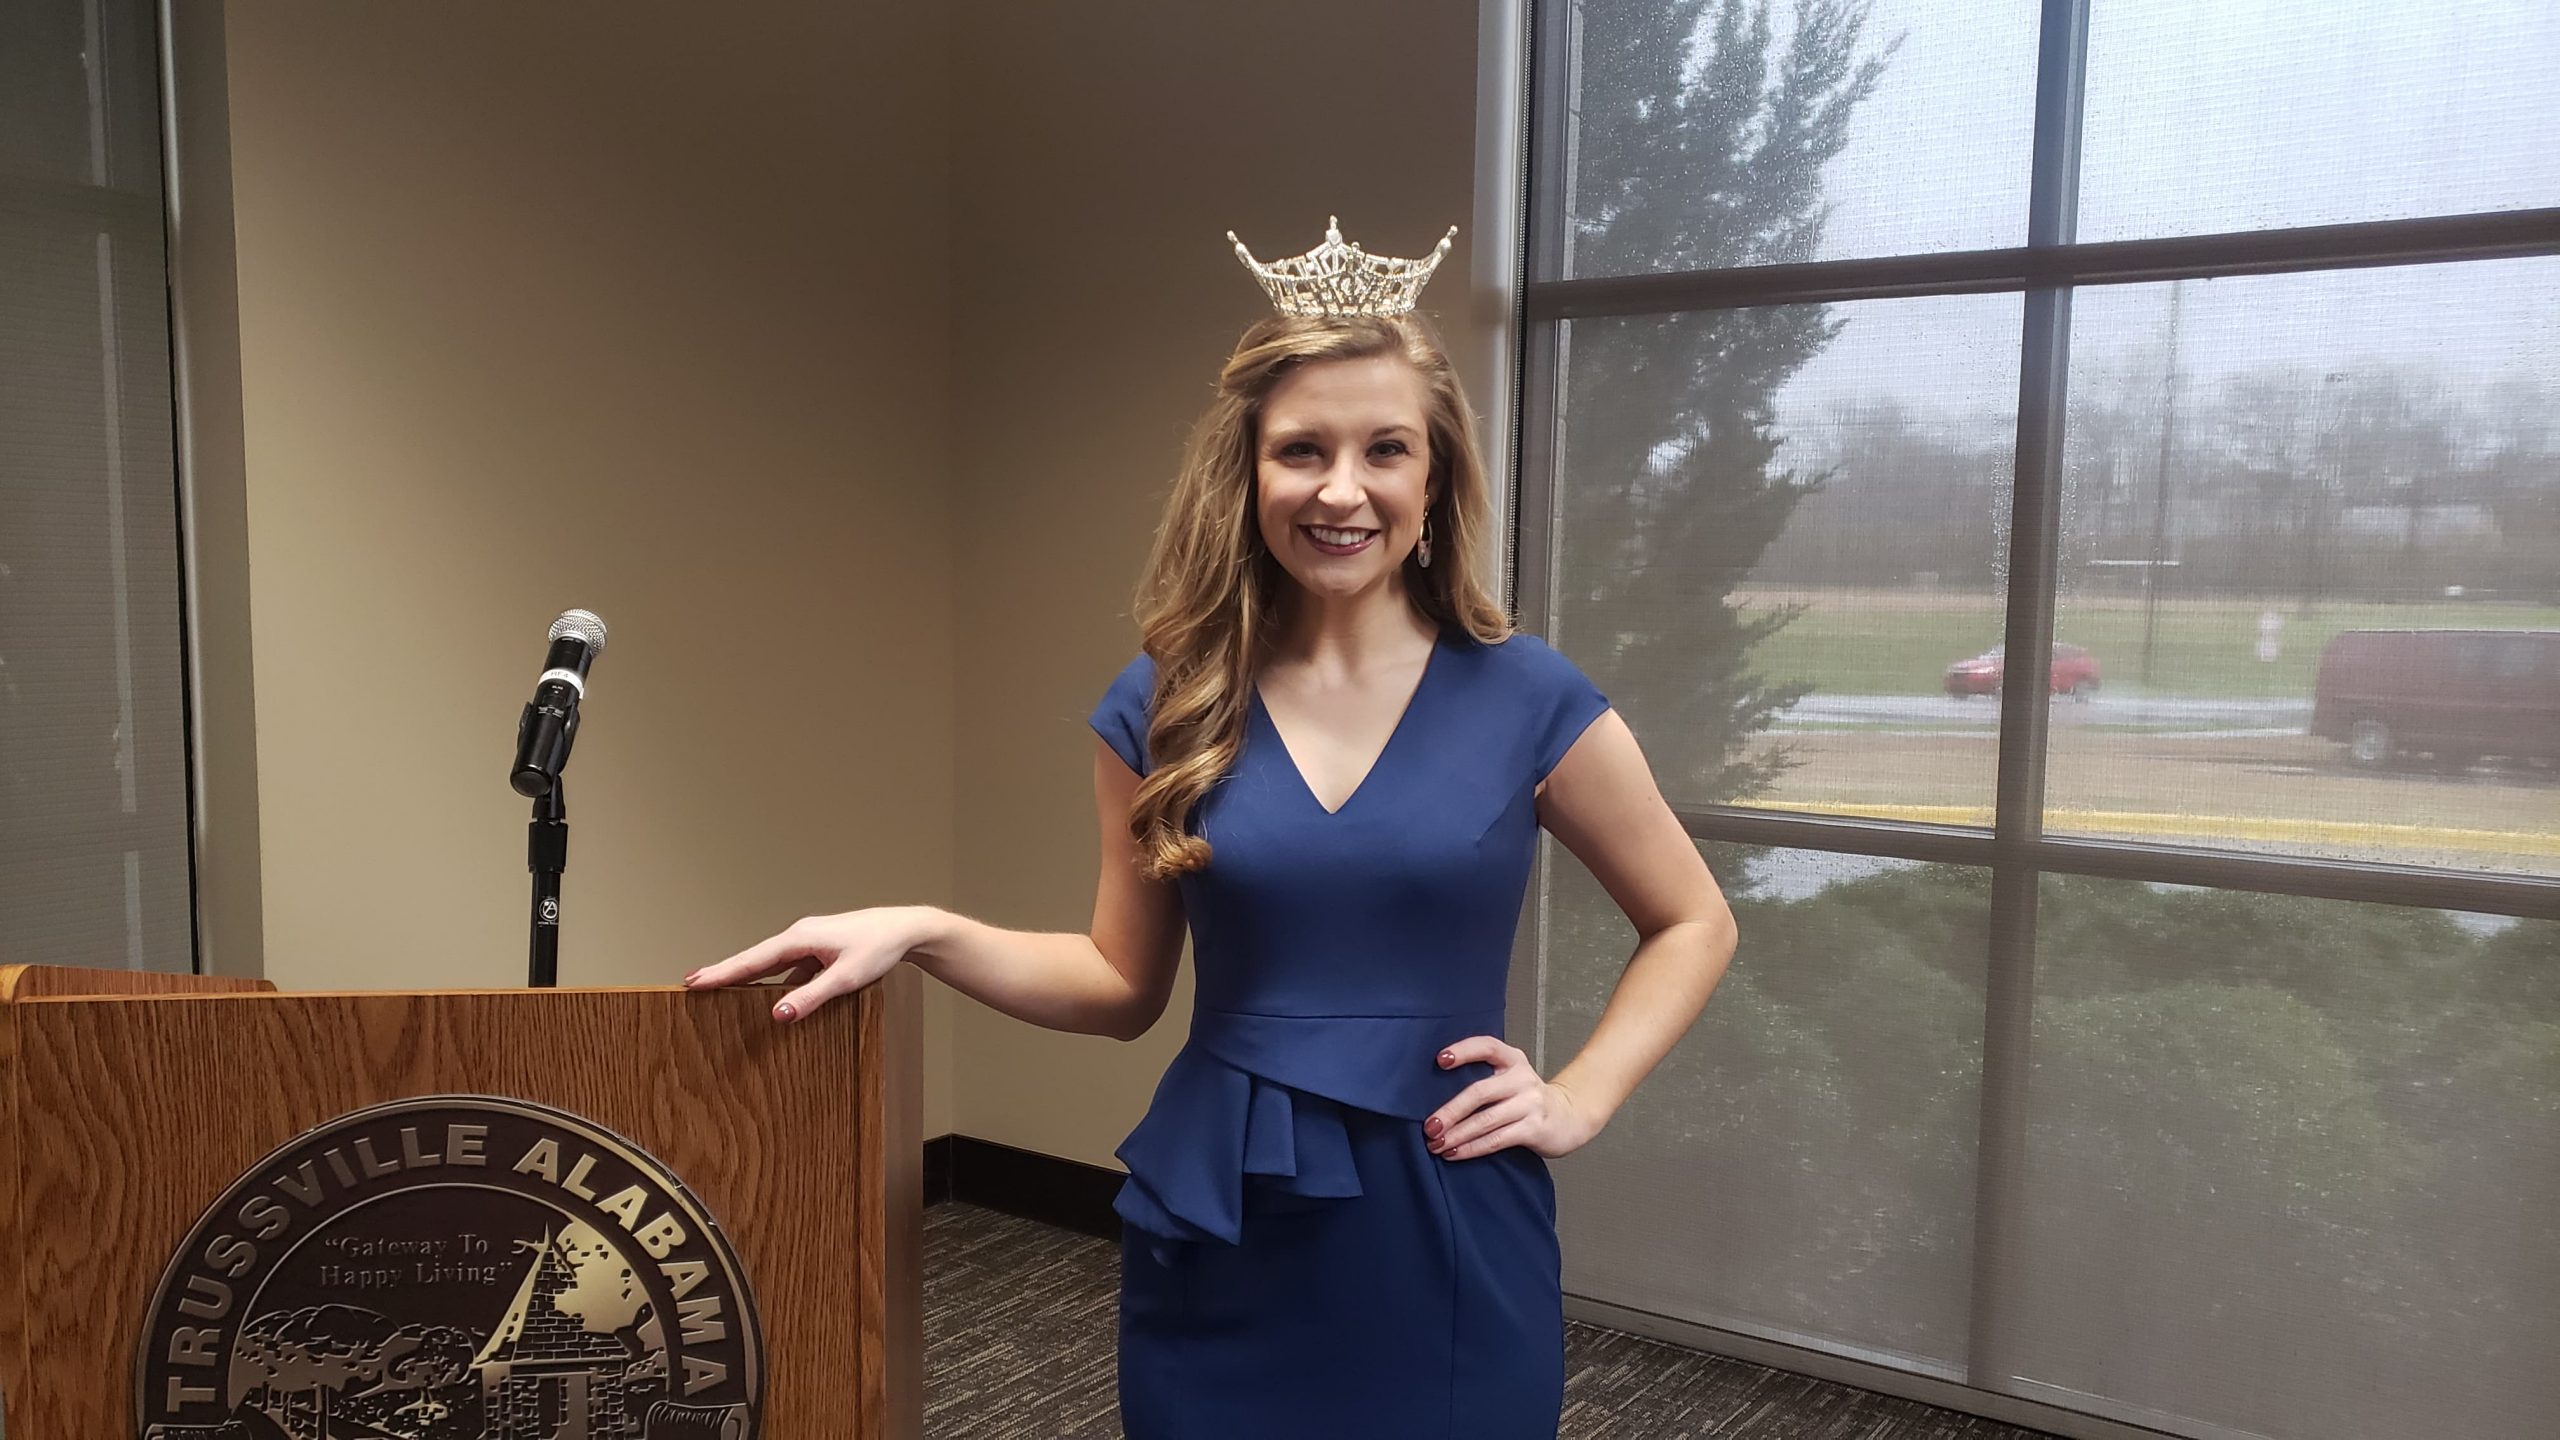 Miss Trussville speaks at Trussville Area Chamber of Commerce Luncheon